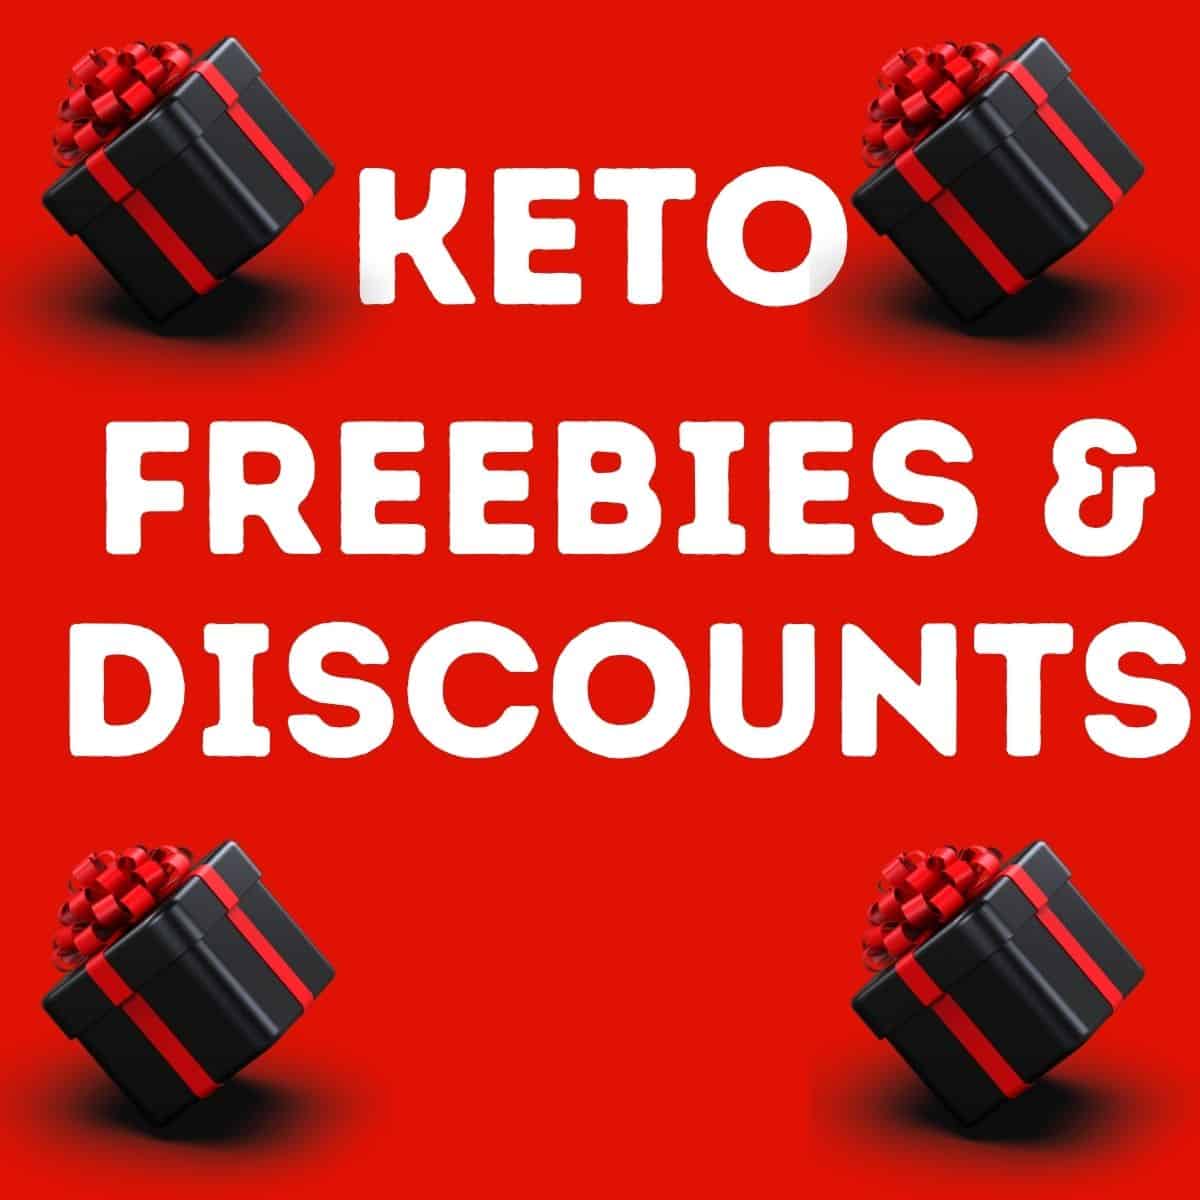 mockups for low-carb keto discounts and special offers